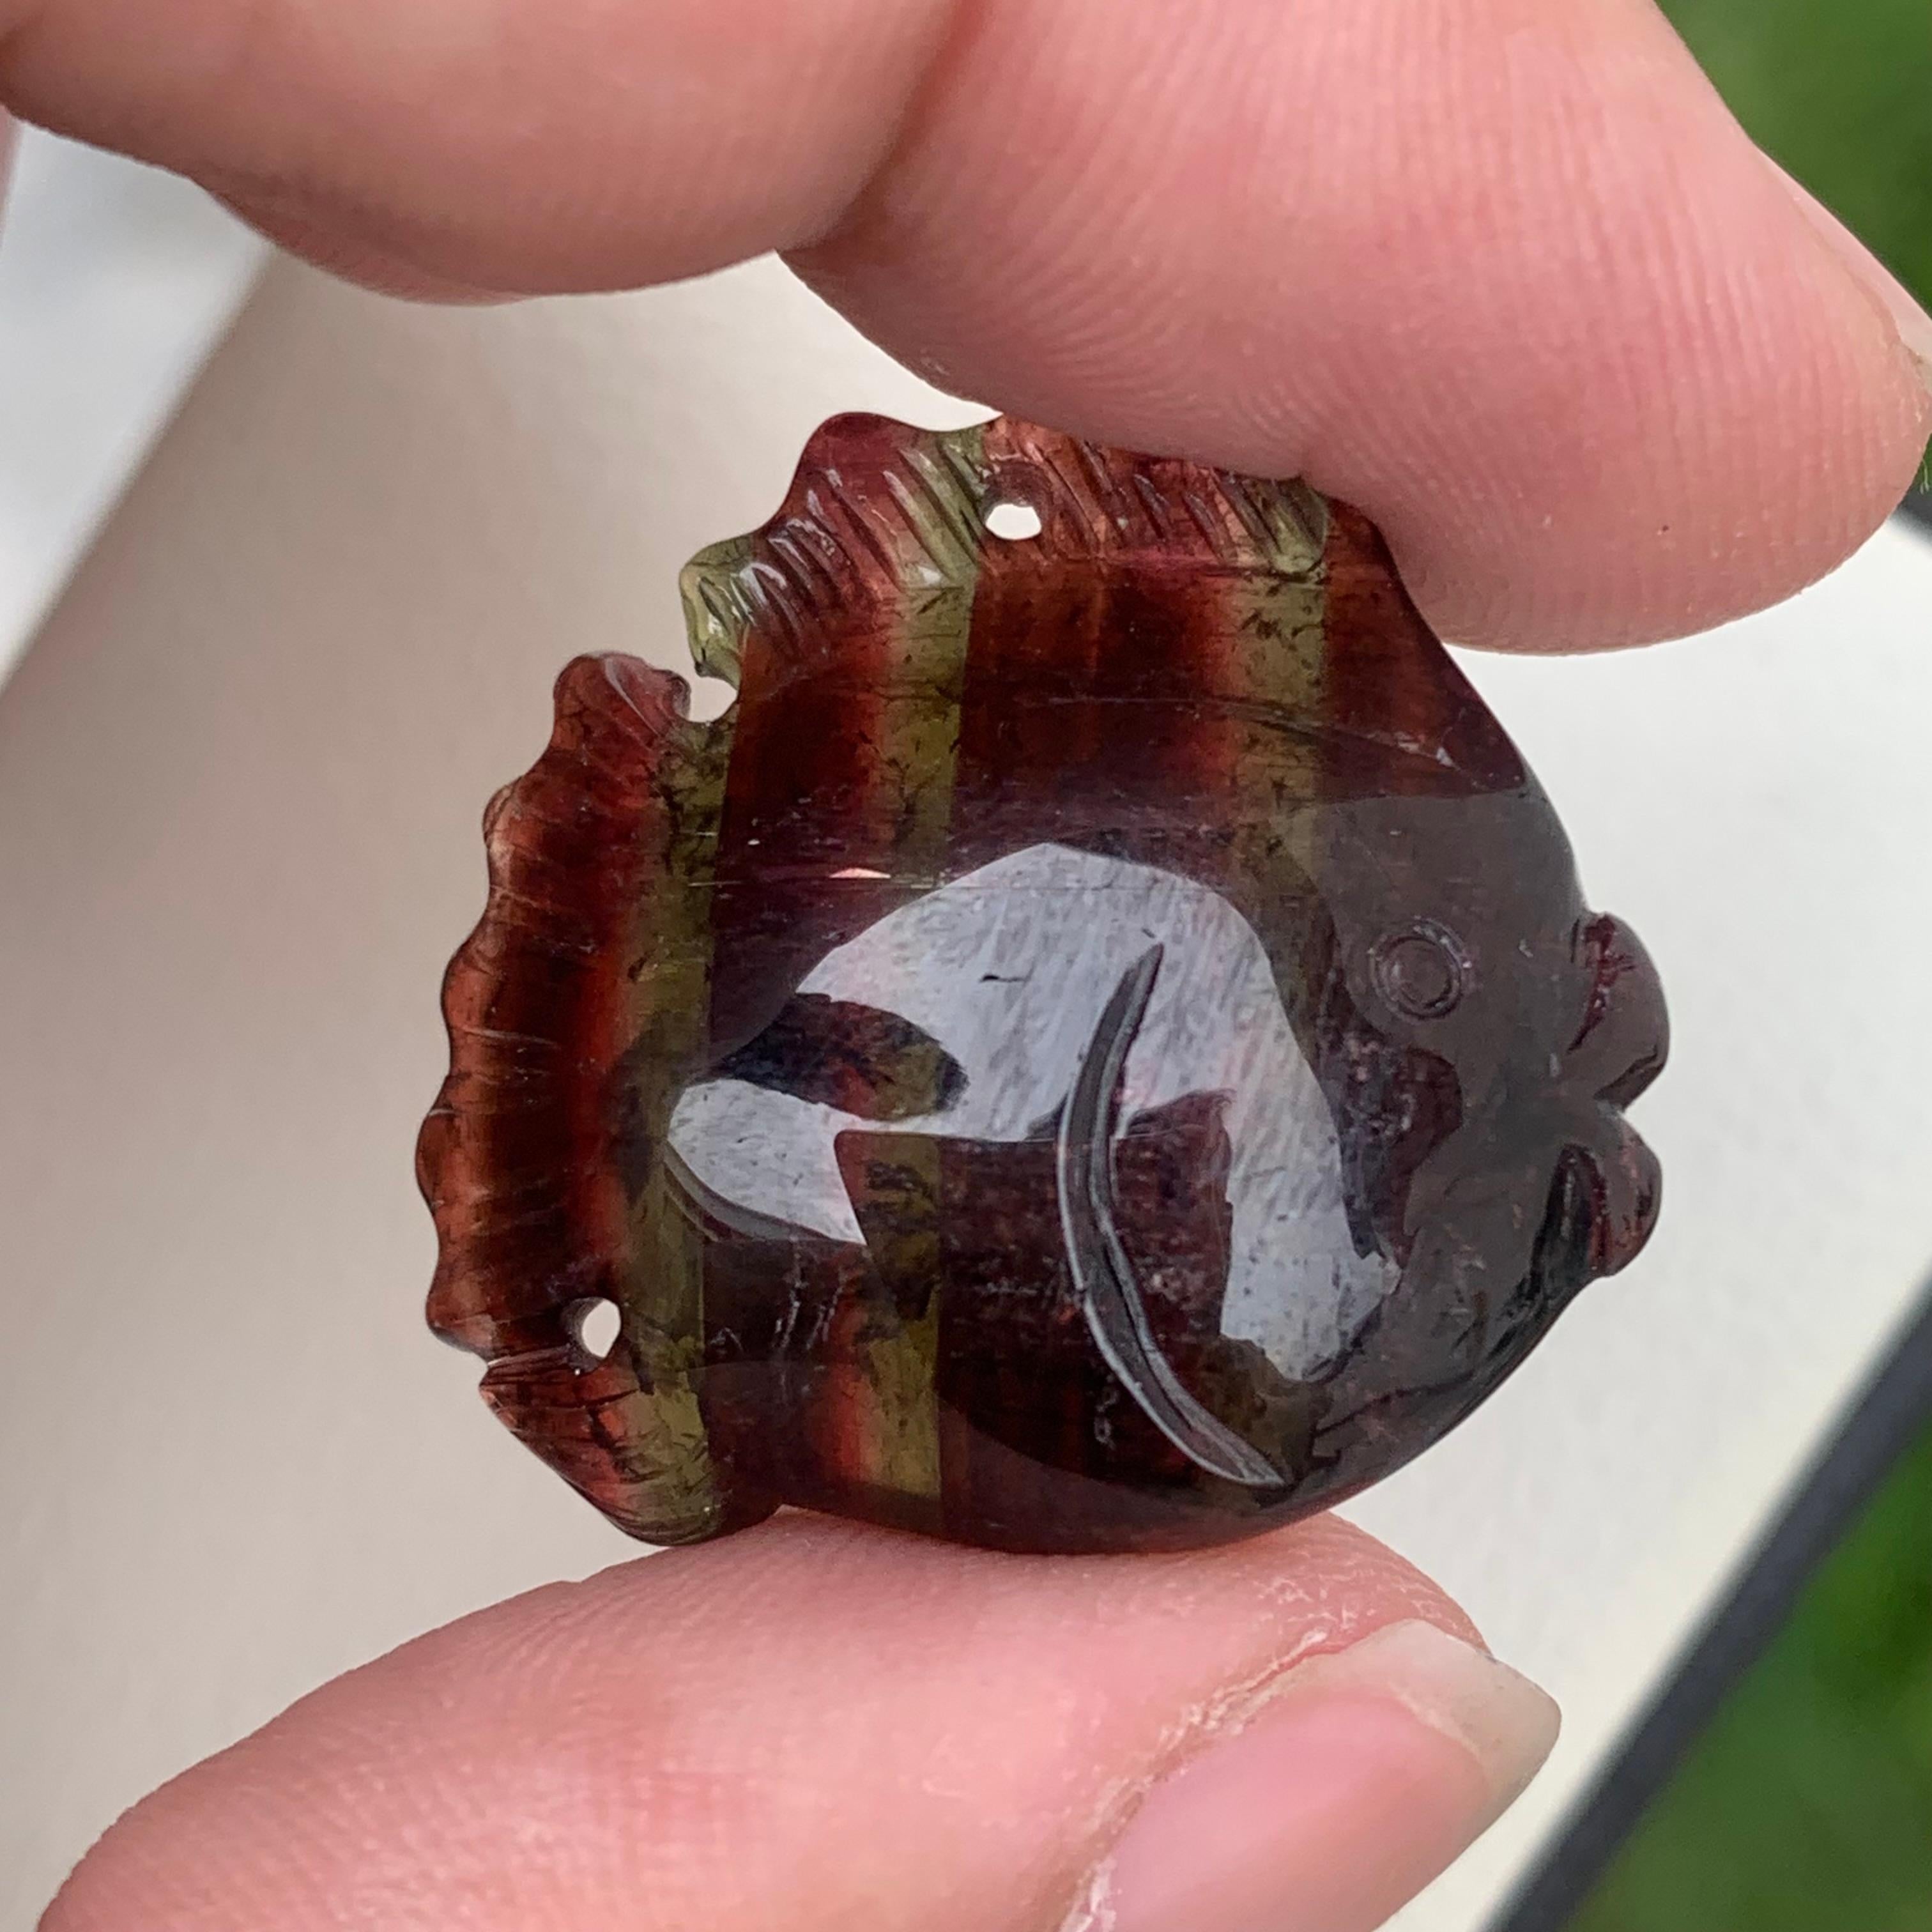 Stunning 37.10 Carats Bi-Color Fish Shape Tourmaline Drilled Carving. 
Weight: 37.10 Carats
Dimension: 2.5 x 2.3 x 0.9 Cm
Origin: Africa
Color: Red & Green
Shape: Carving
Quality: AAA
Bicolor tourmaline is connected to the heart chakra, which makes